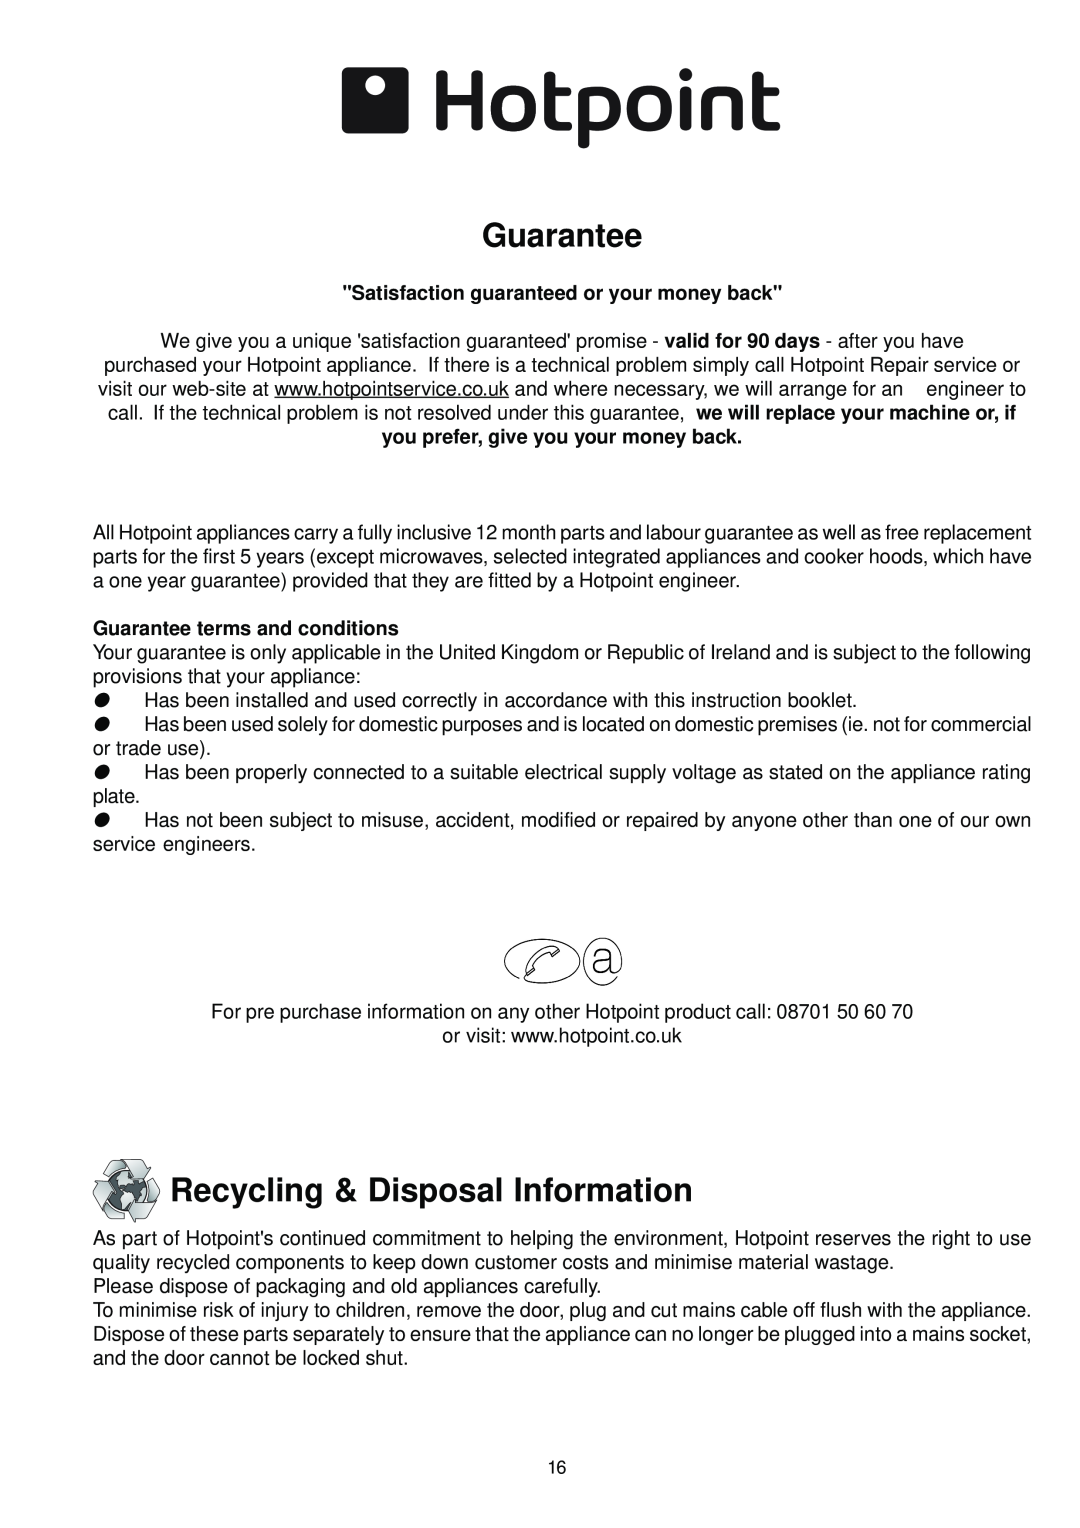 Hotpoint SC 87EX manual Guarantee, Recycling & Disposal Information, Satisfaction guaranteed or your money back 